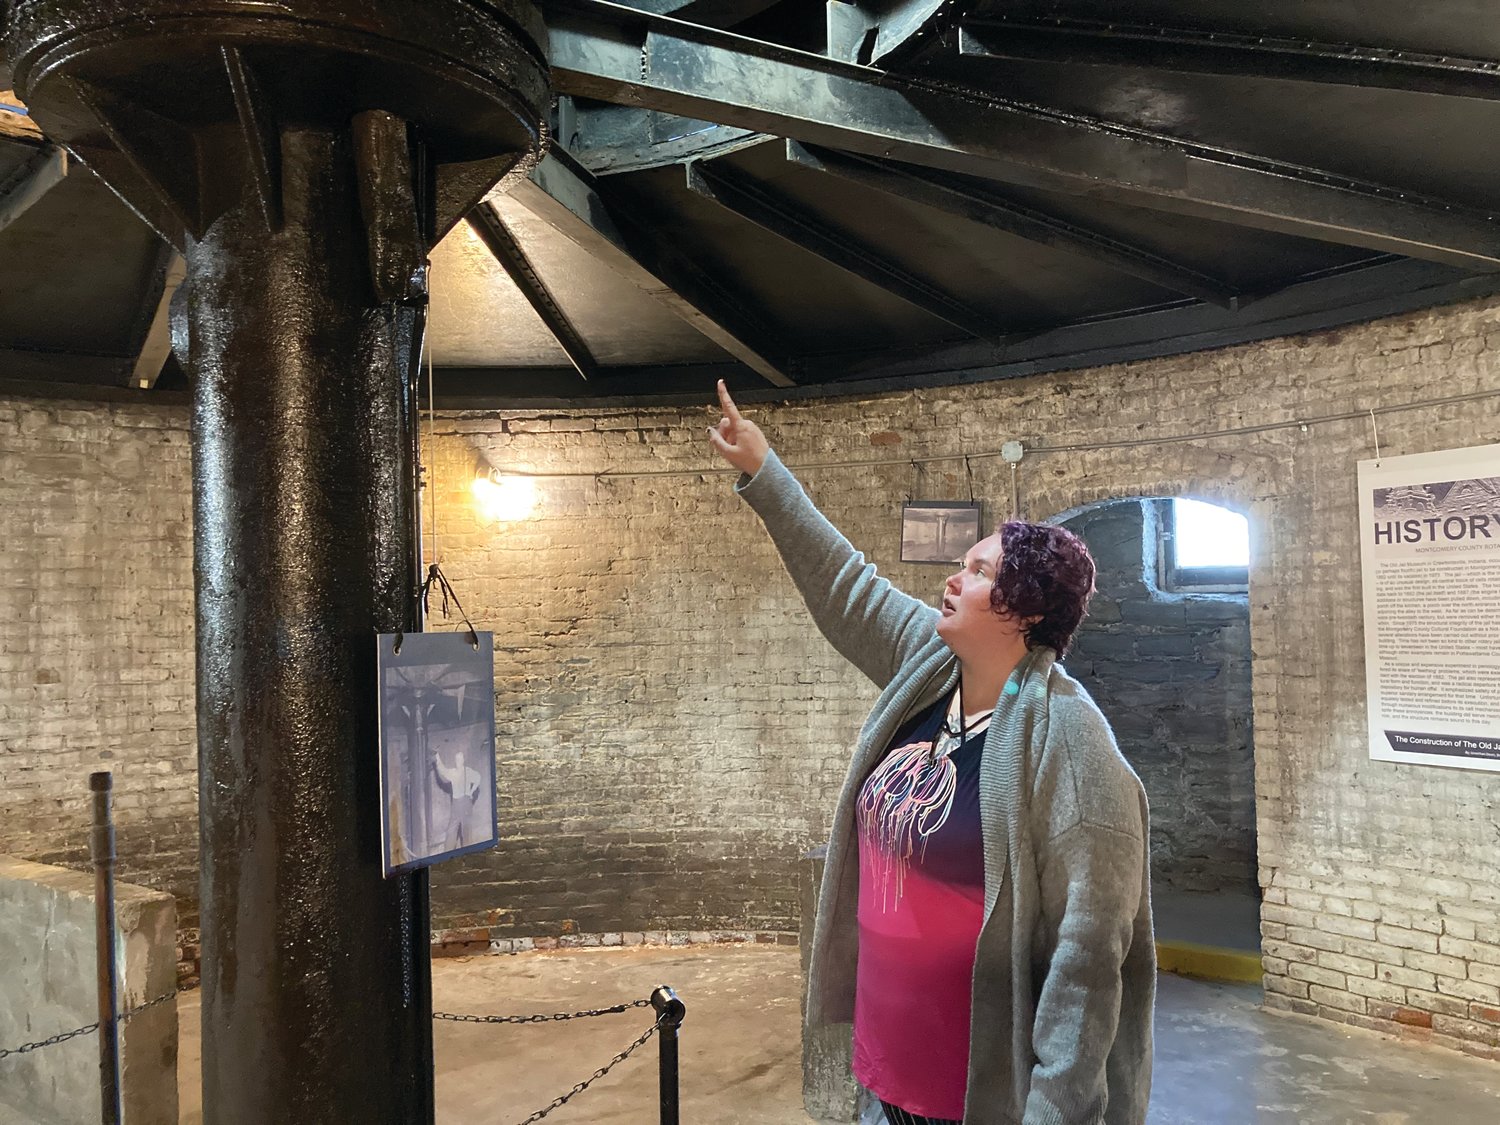 Elizabeth Peck, a docent at the Rotary Jail Museum, points to the mechanism in the jail